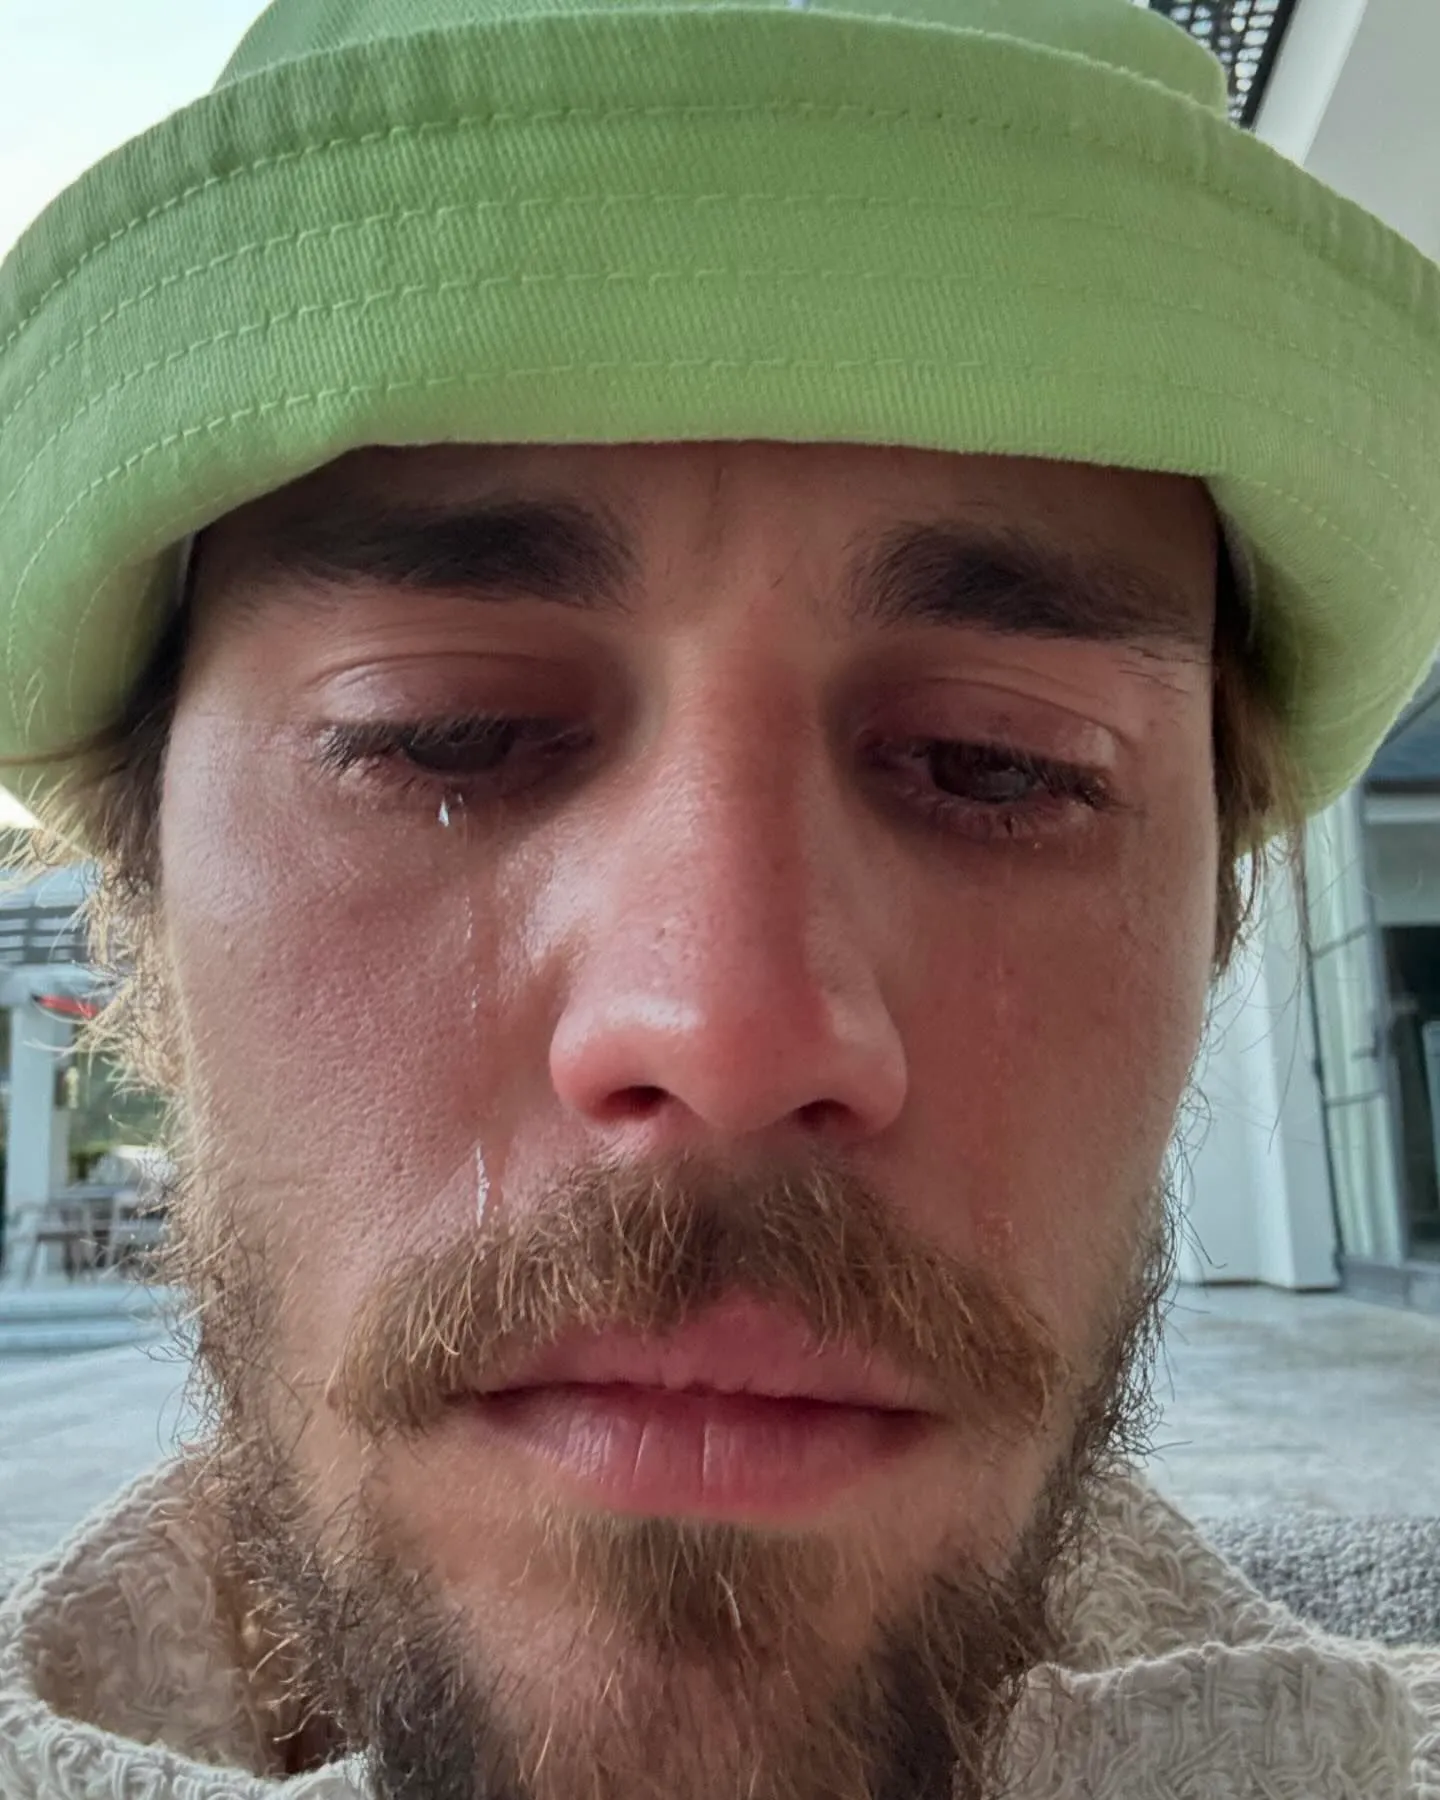 Justin Bieber posted a photo of him crying